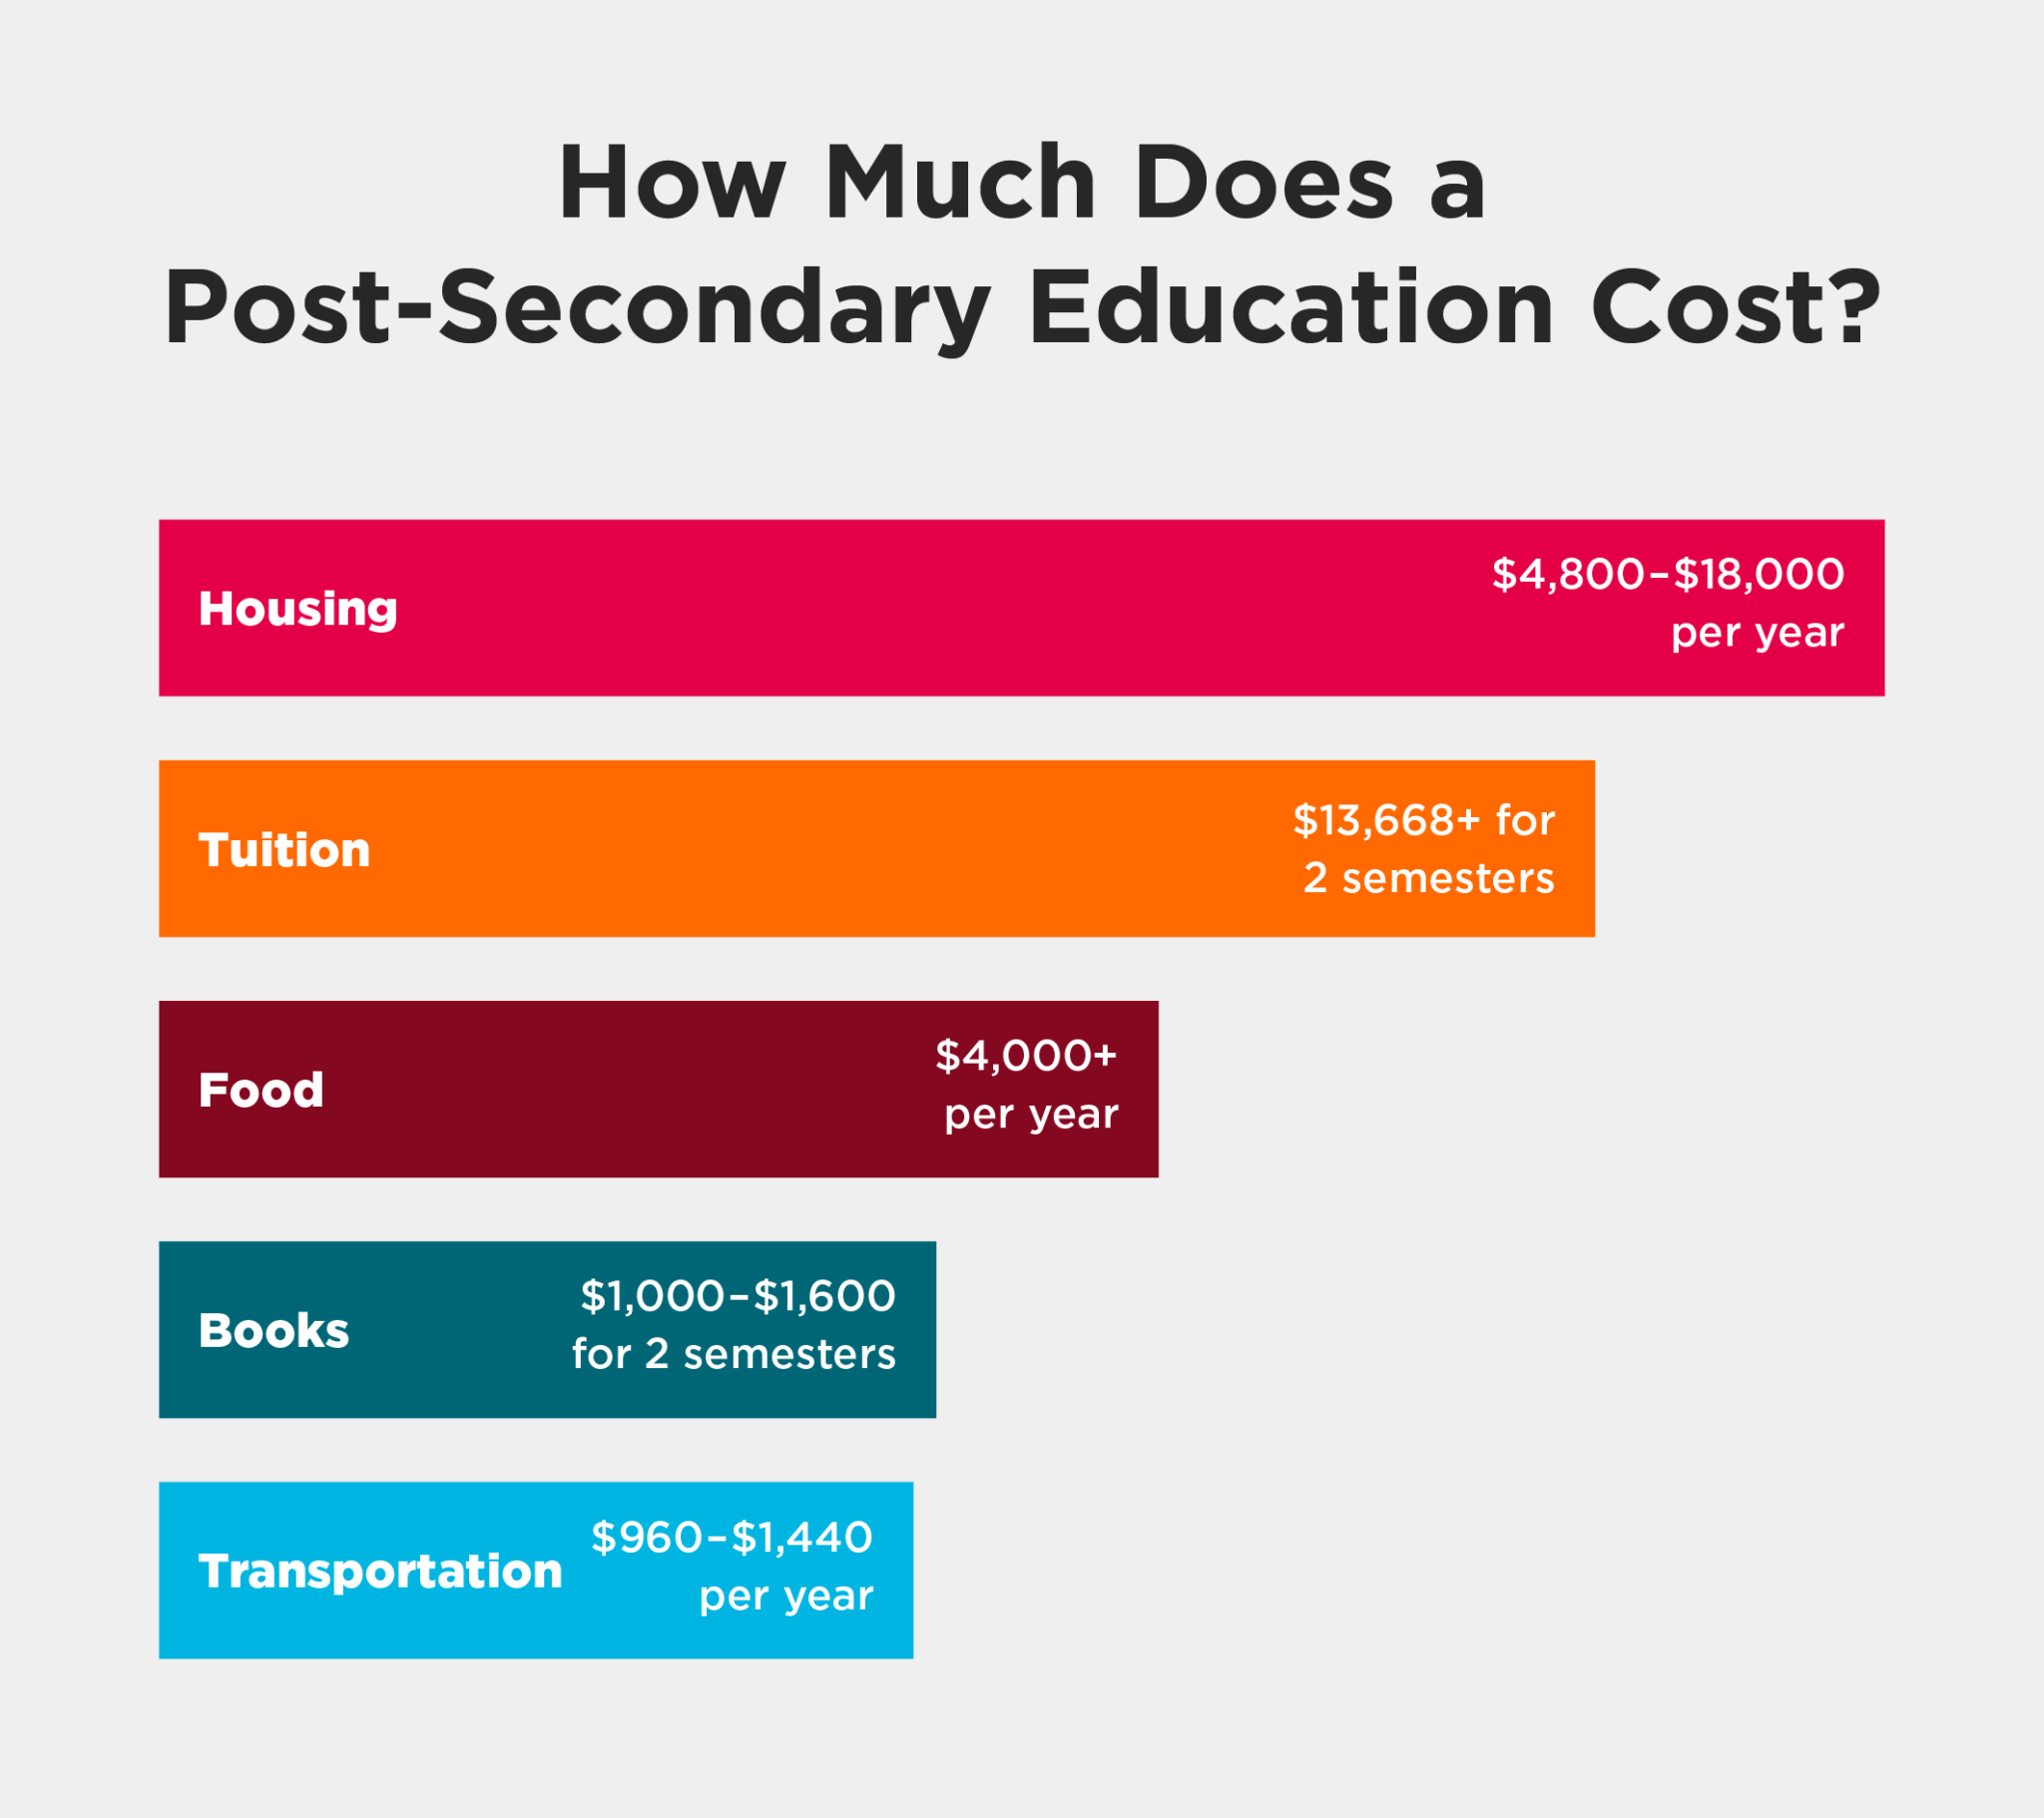 post secondary education levels in canada